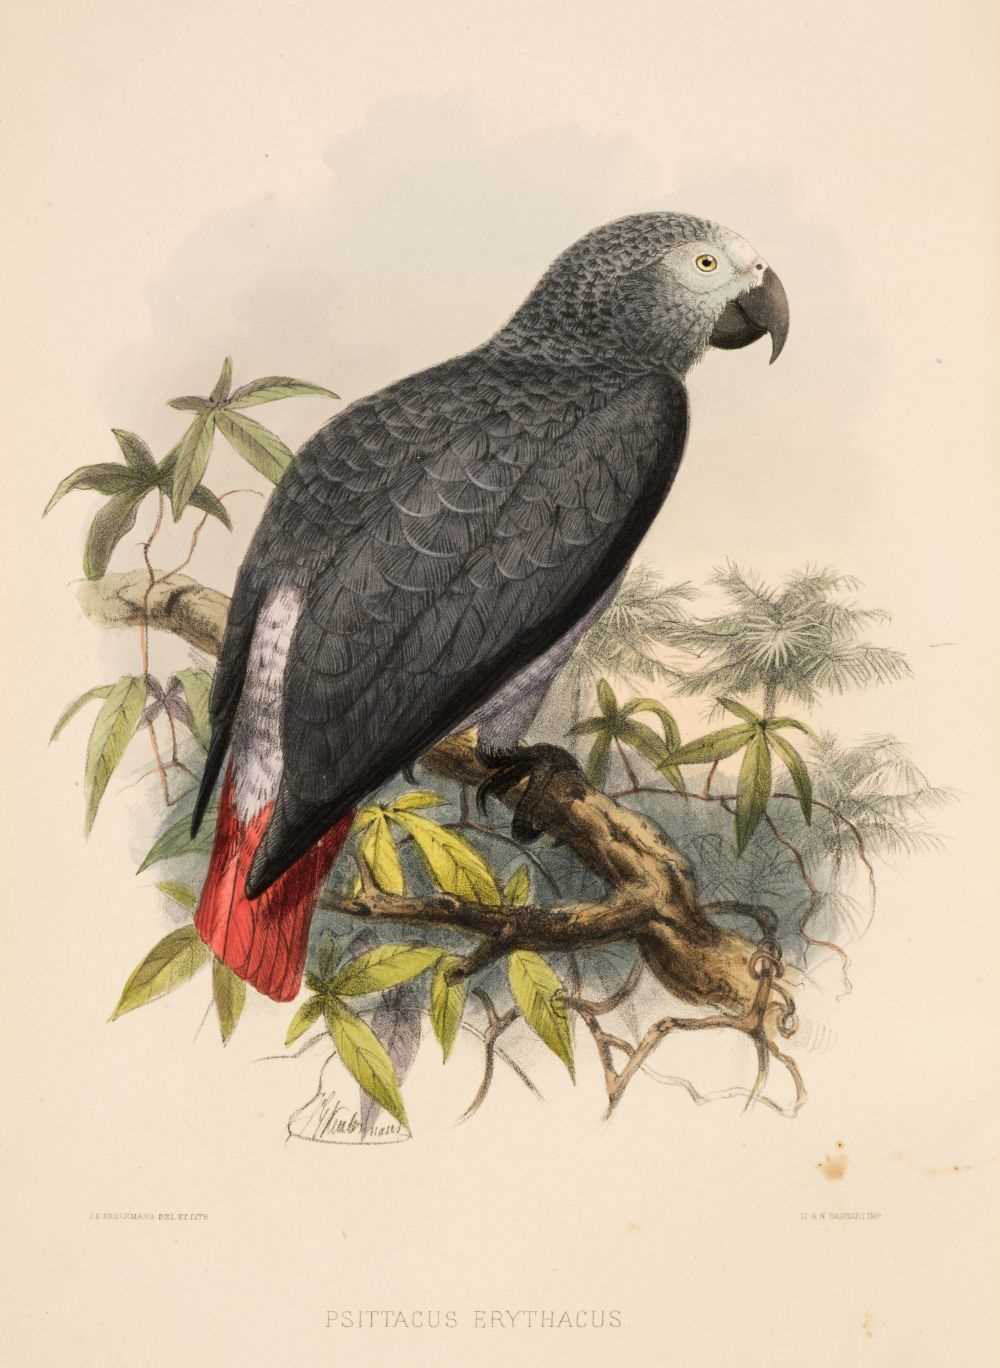 Lot 91 - Keulemans (John Gerard). A Natural History of Cage Birds, parts 1 - 3 (only of 4), 1871